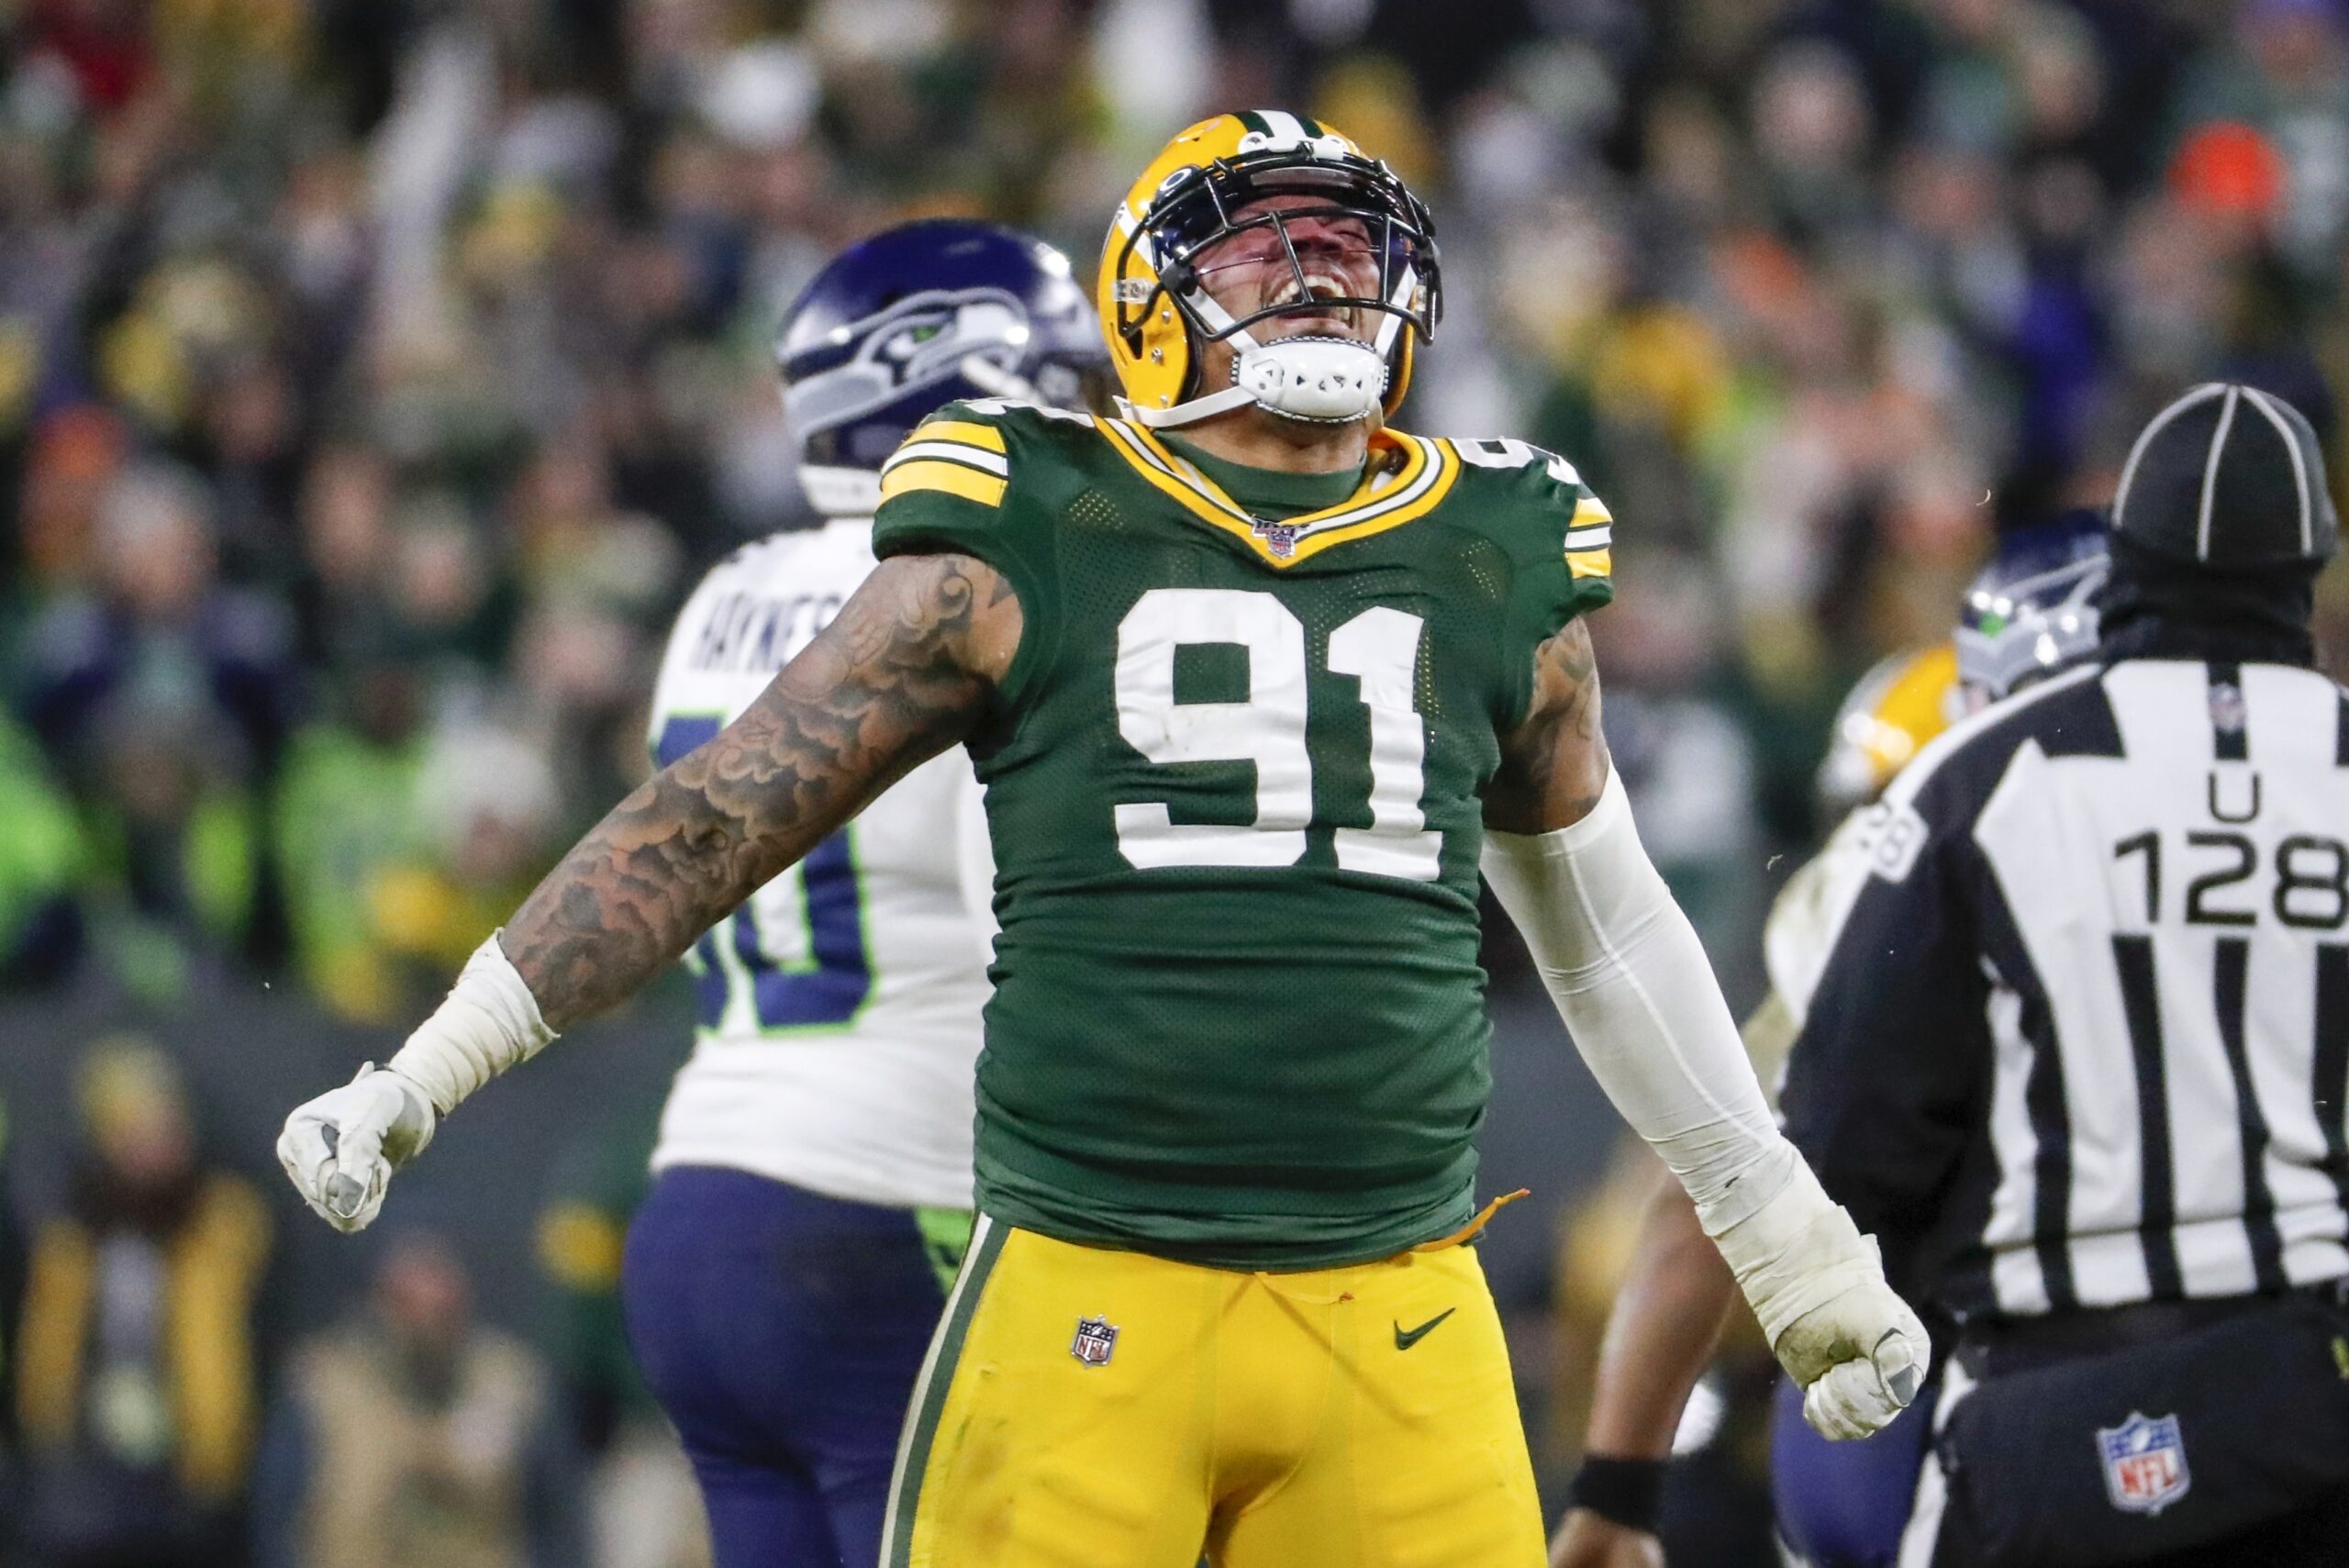 The Green Bay Packers hold on to win divisional playoff game at Lambeau Field